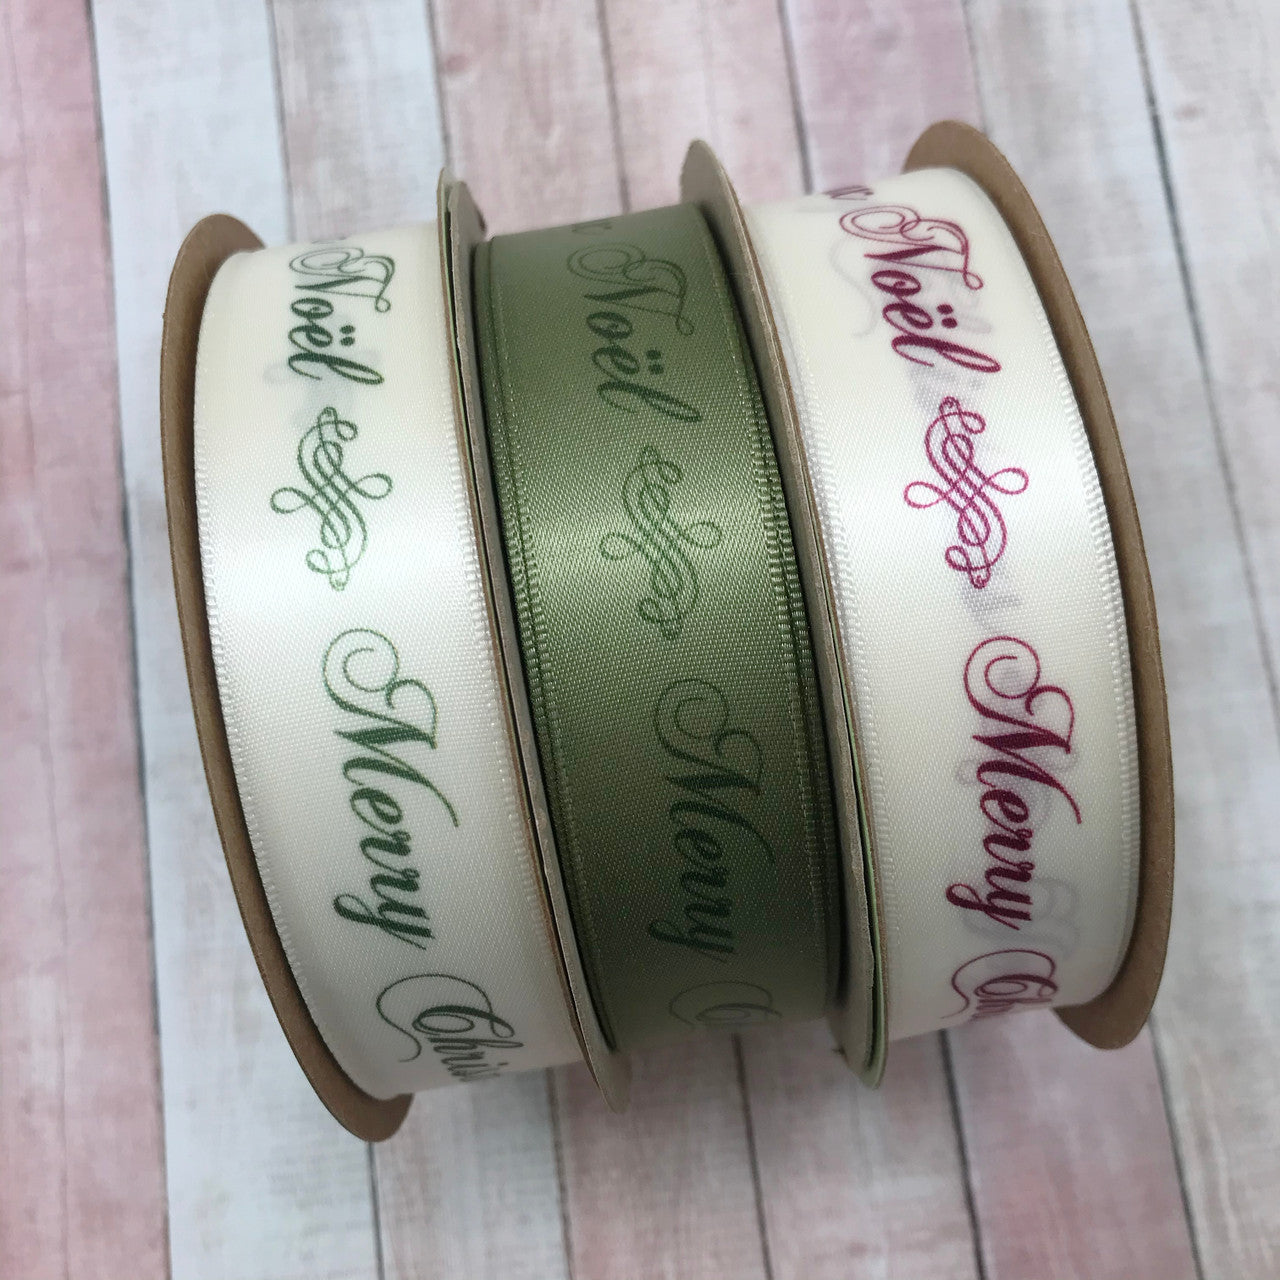 Joyeux Noel and Merry Christmas in green on sage printed on sage and antique white pair beautifully with the same design with ruby lettering. These ribbon are perfect for those who wish to express their holiday joy in French and English. Use this luxury ribbon for gift wrap, tree trimming, wreaths, floral design and table decor. All our ribbon is designed and printed in the USA